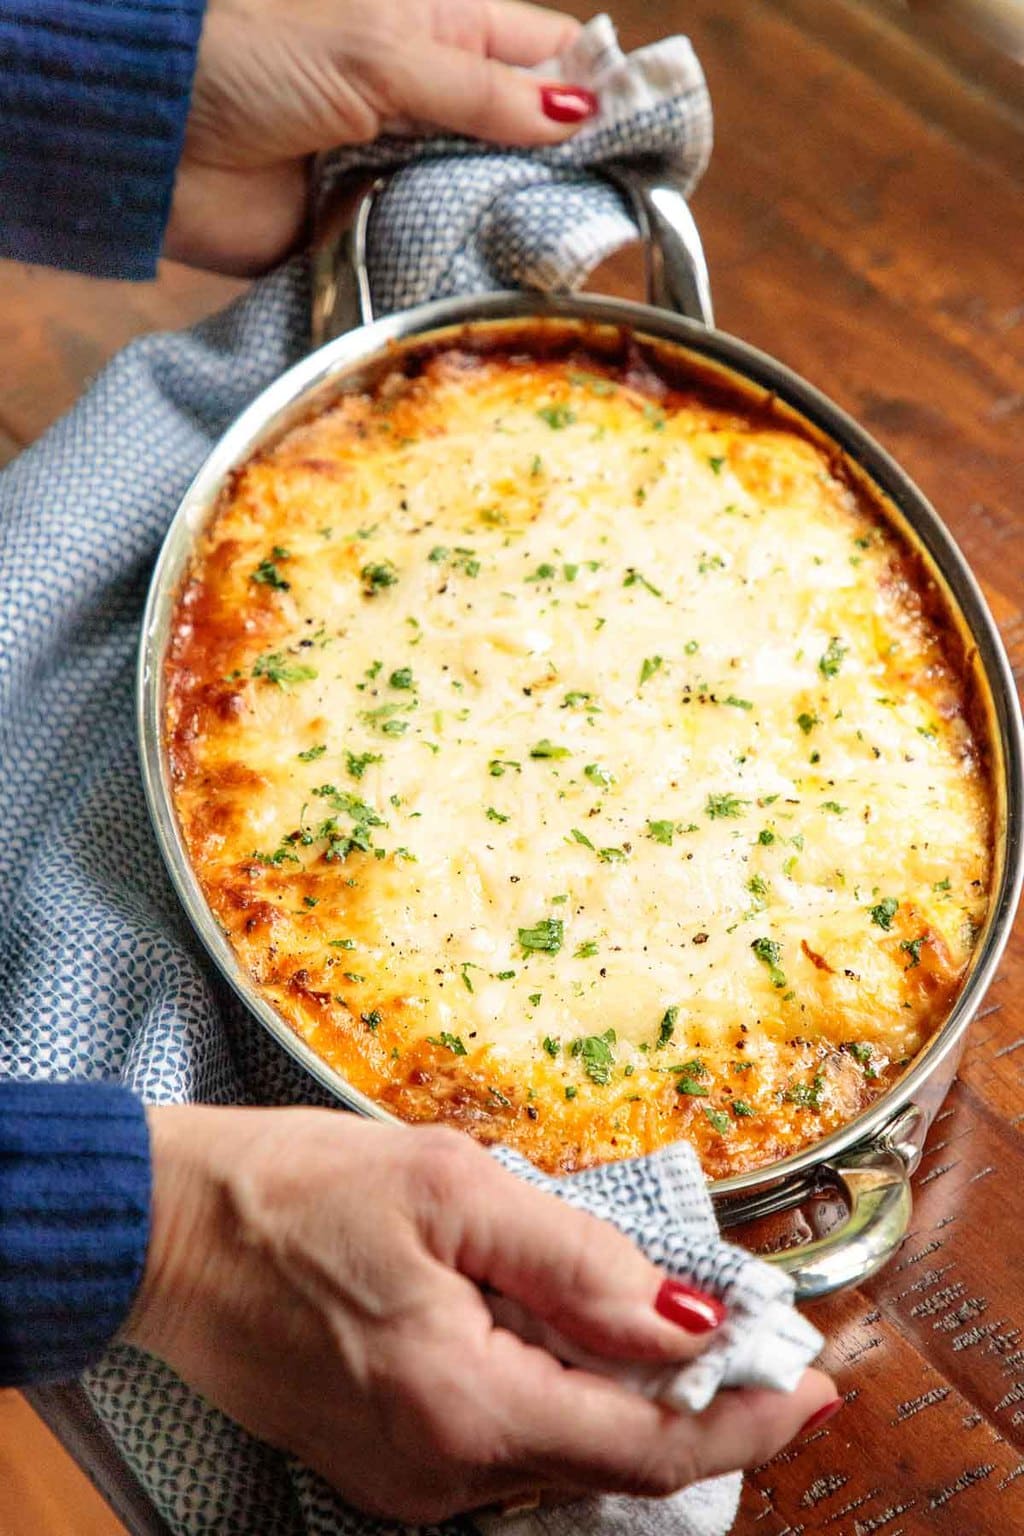 Vertical photo of a person holding a baking pan of Make-Ahead Homemade Manicotti above a wood table.